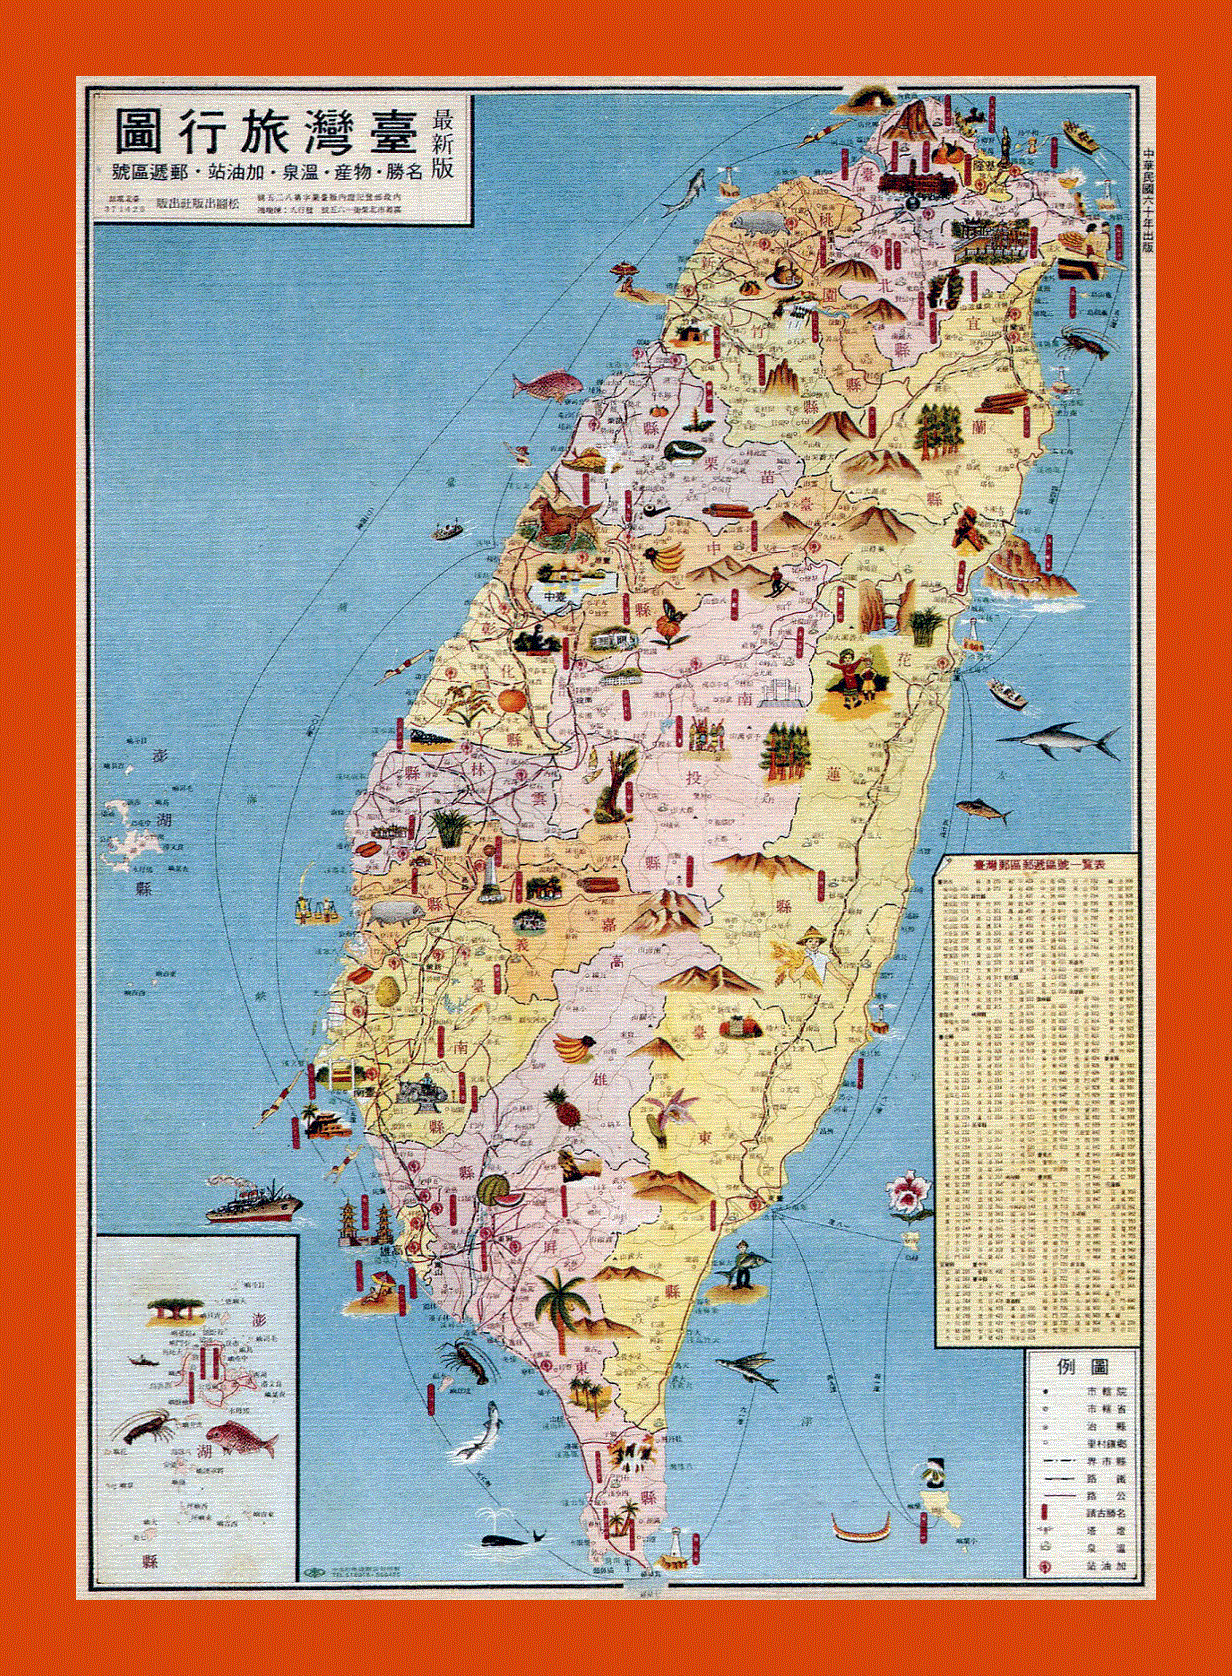 Old illustrated map of Taiwan